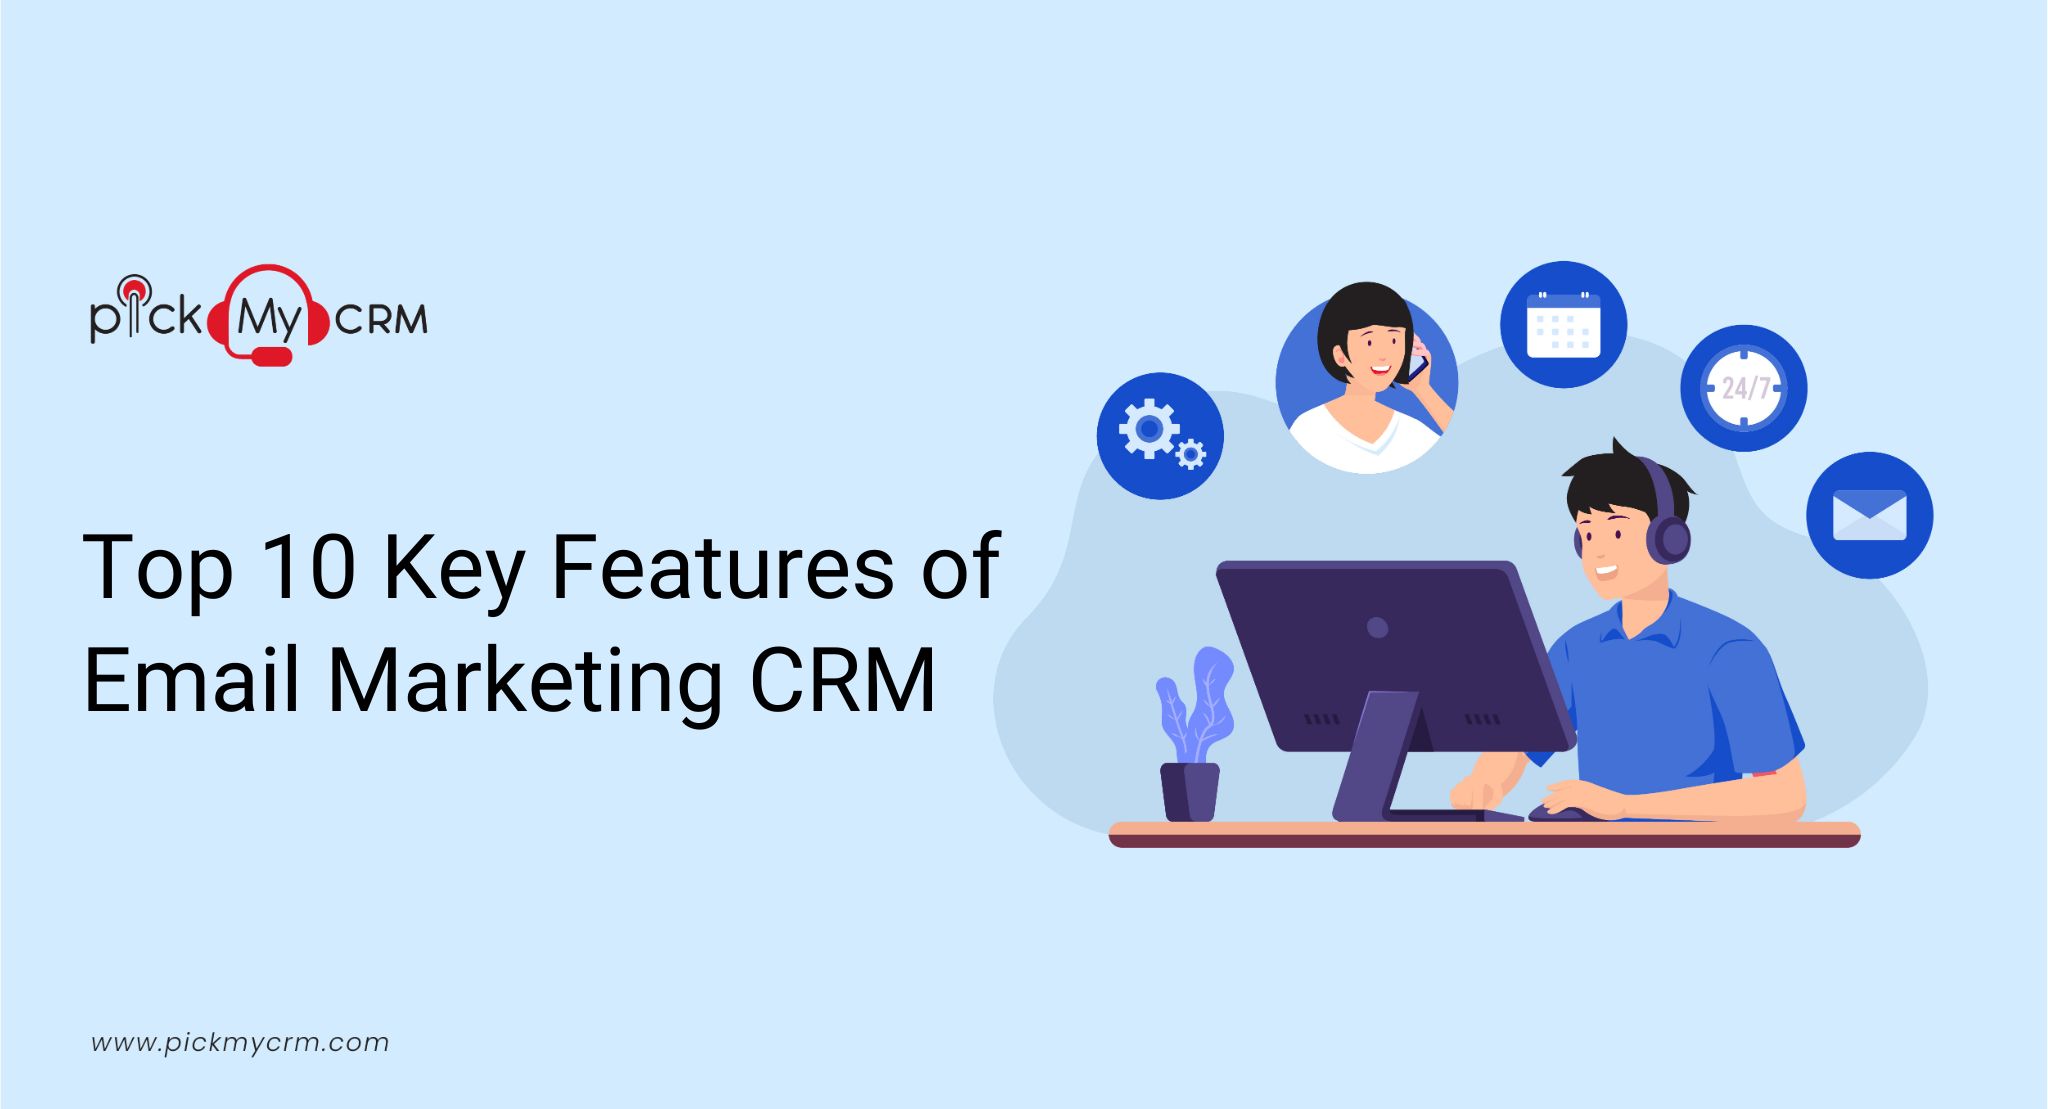 Top 10 Key Features of Email Marketing CRM